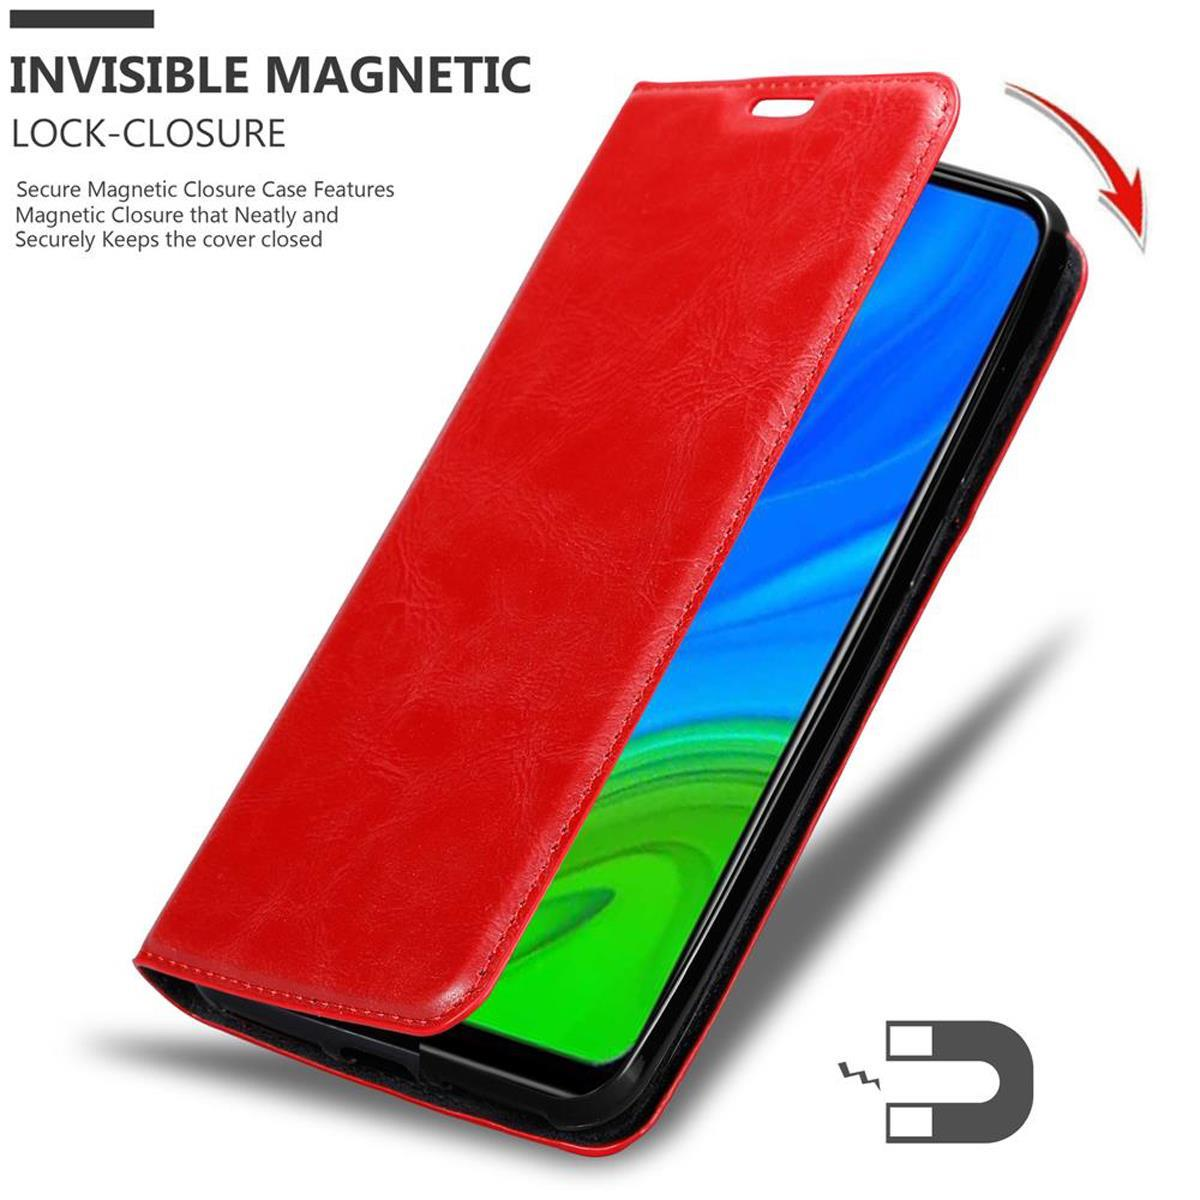 SMART Huawei, ROT Book CADORABO Invisible P Hülle 2020, Bookcover, APFEL Magnet,